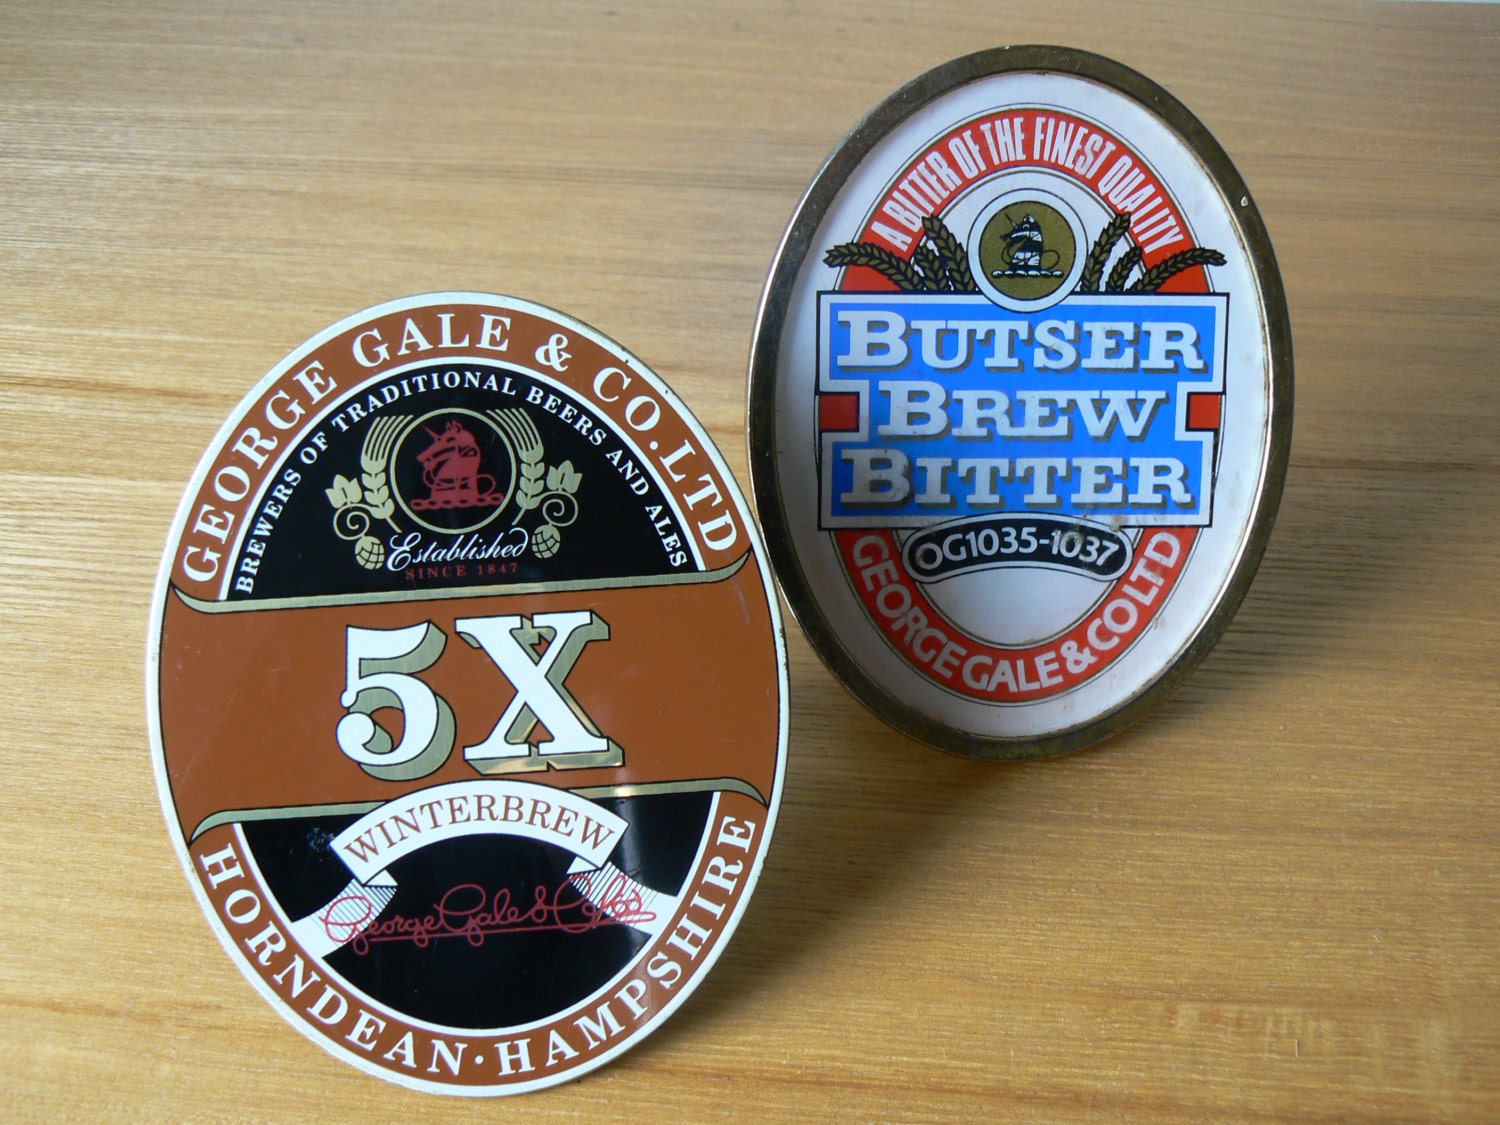 Two Beer Pump Badges from a Local Brewery here in Hampshire UK